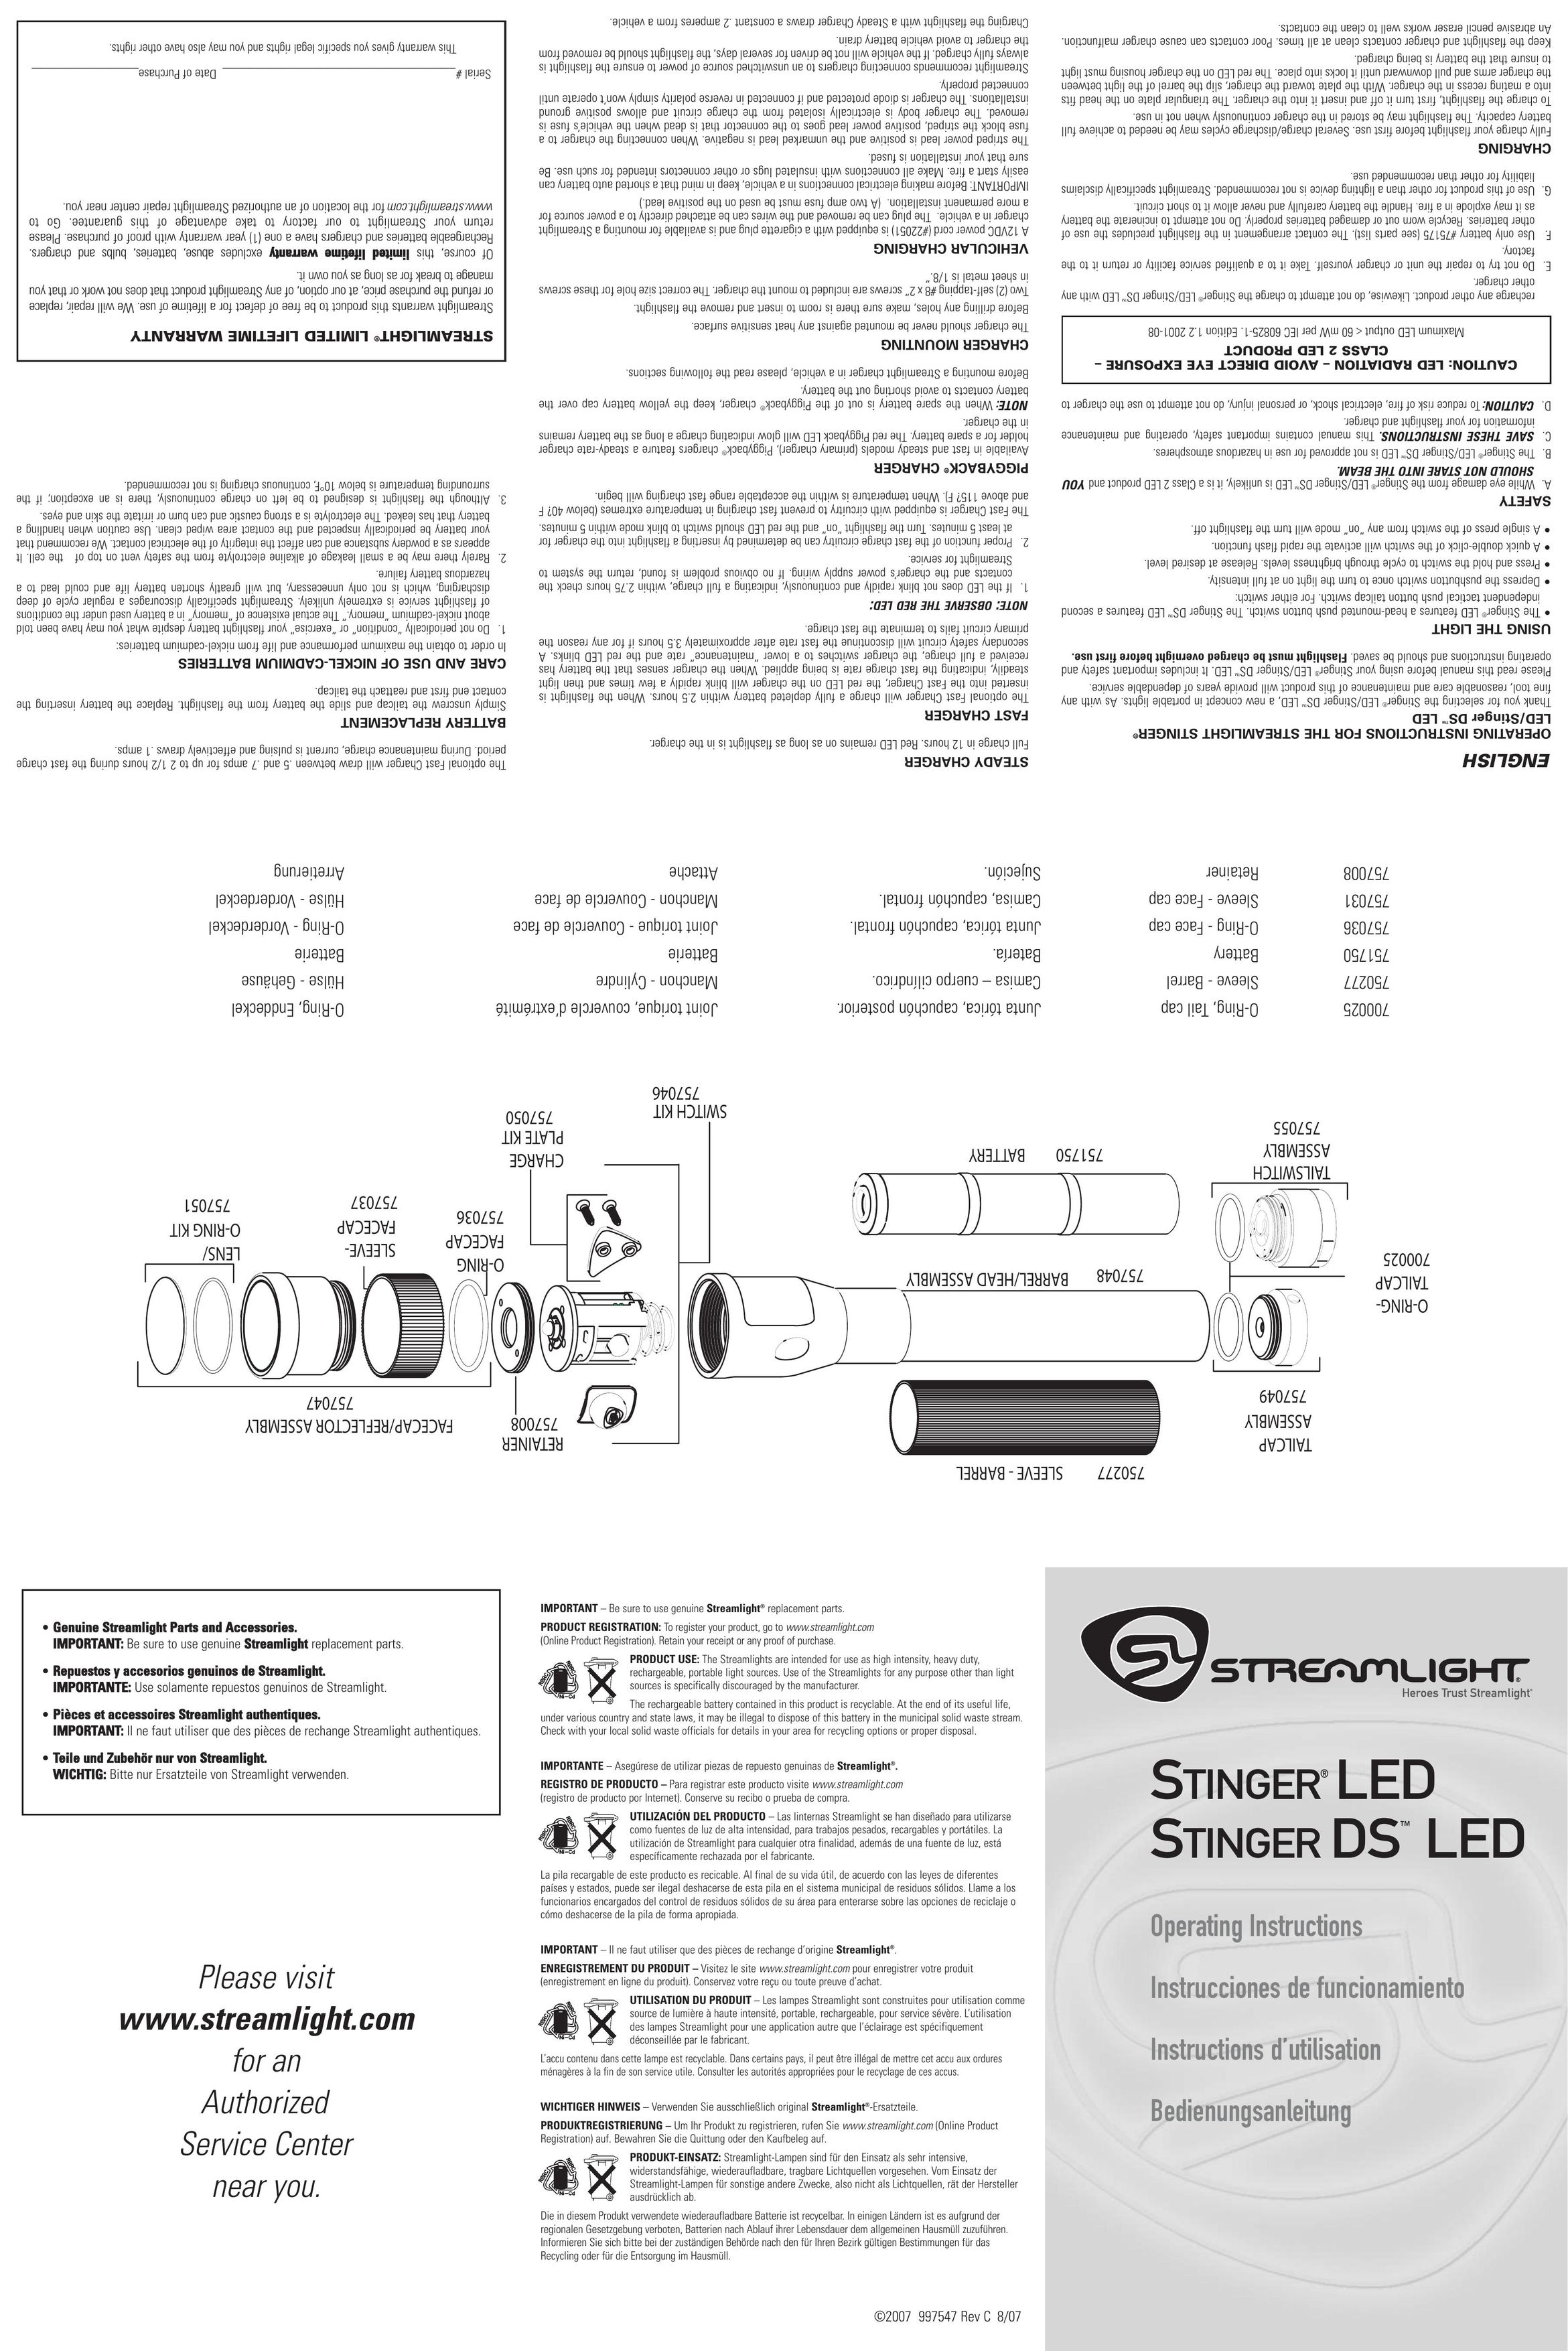 StreamLight 700025 Home Safety Product User Manual